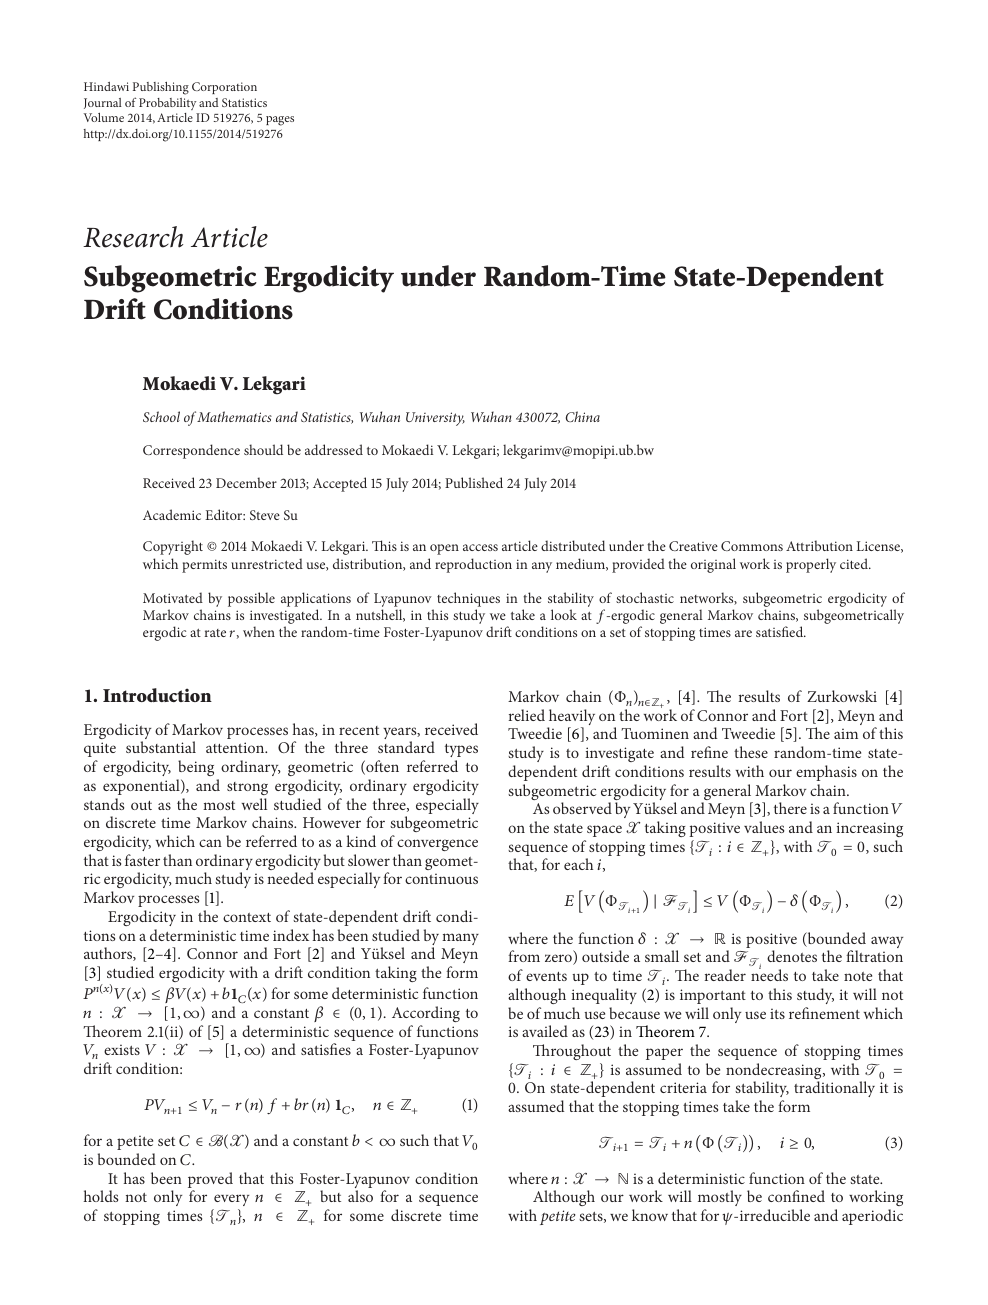 Subgeometric Ergodicity Under Random Time State Dependent Drift Conditions Topic Of Research Paper In Mathematics Download Scholarly Article Pdf And Read For Free On Cyberleninka Open Science Hub